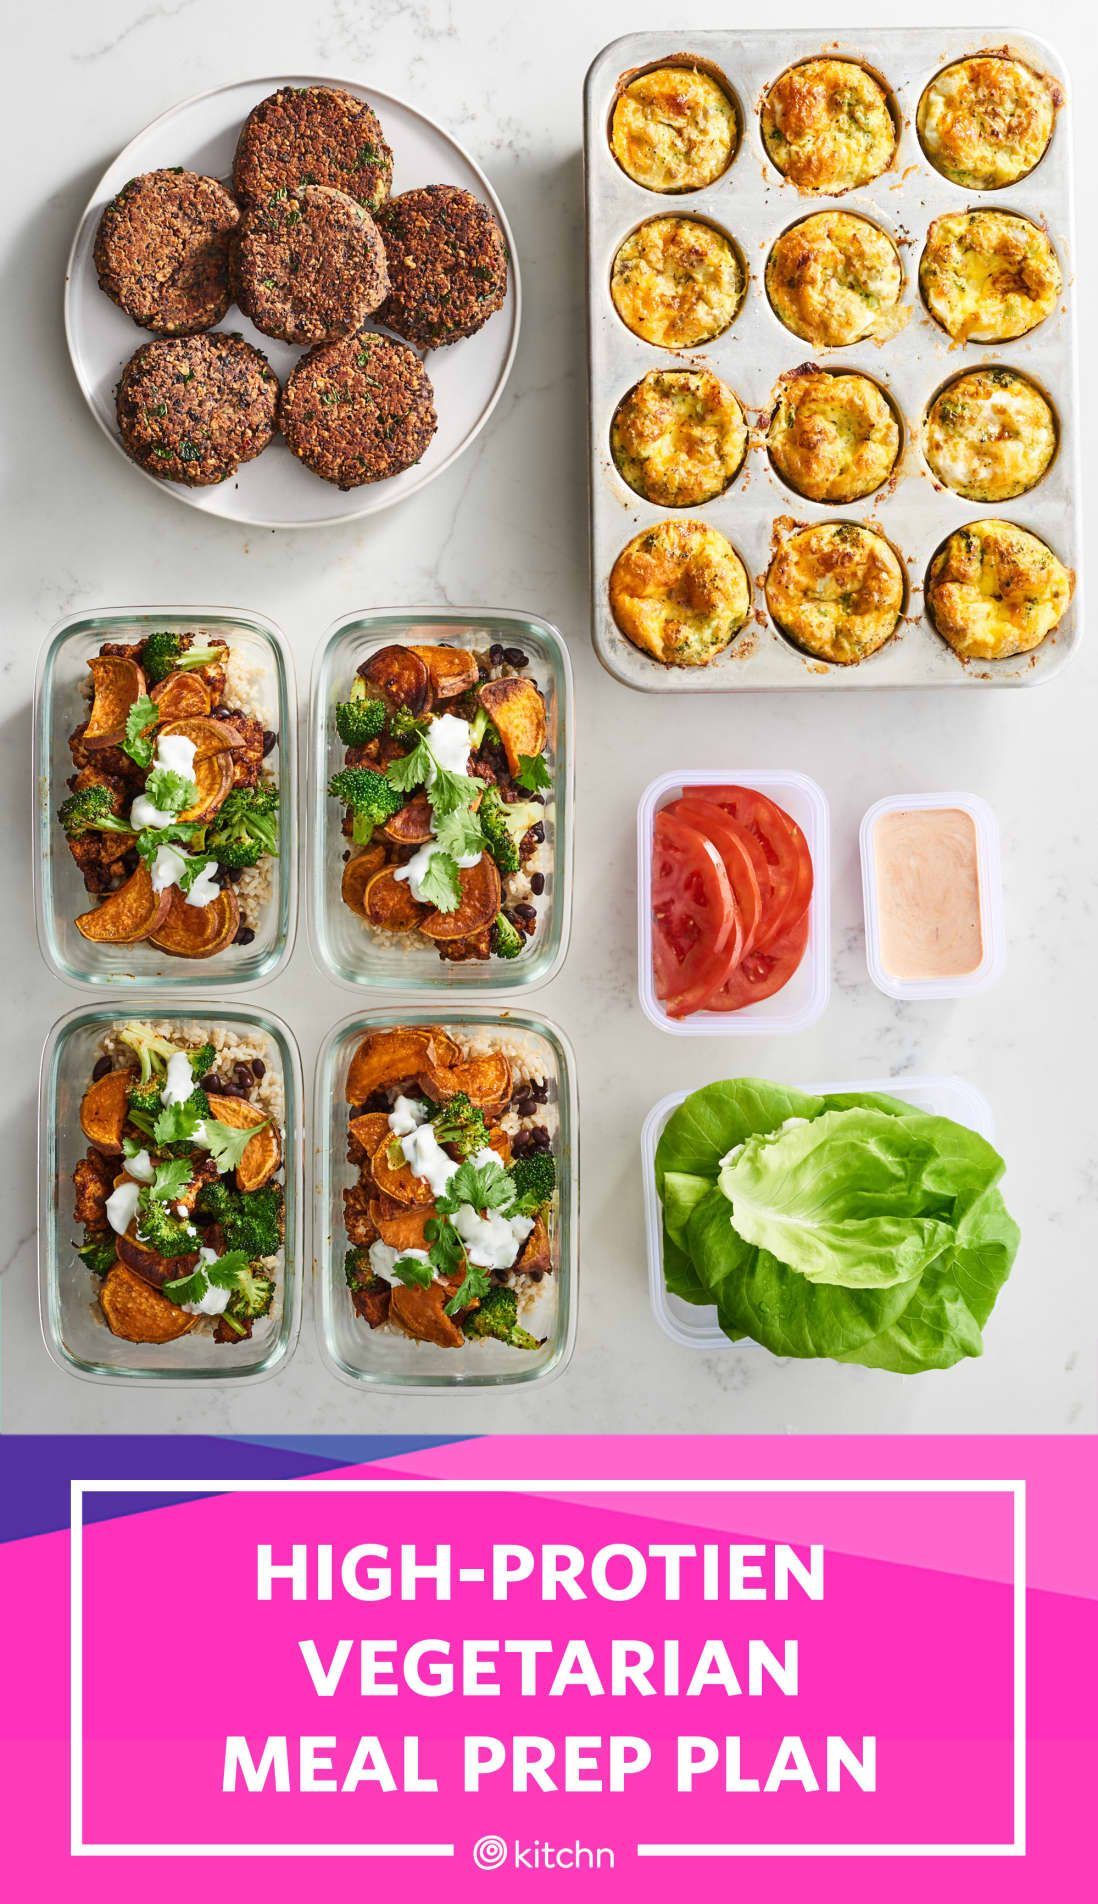 Meal Prep Plan: How I Prep a Week of High-Protein Vegetarian Meals In Just 2 Hours - Meal Prep Plan: How I Prep a Week of High-Protein Vegetarian Meals In Just 2 Hours -   18 meal prep recipes vegetarian lunch ideas